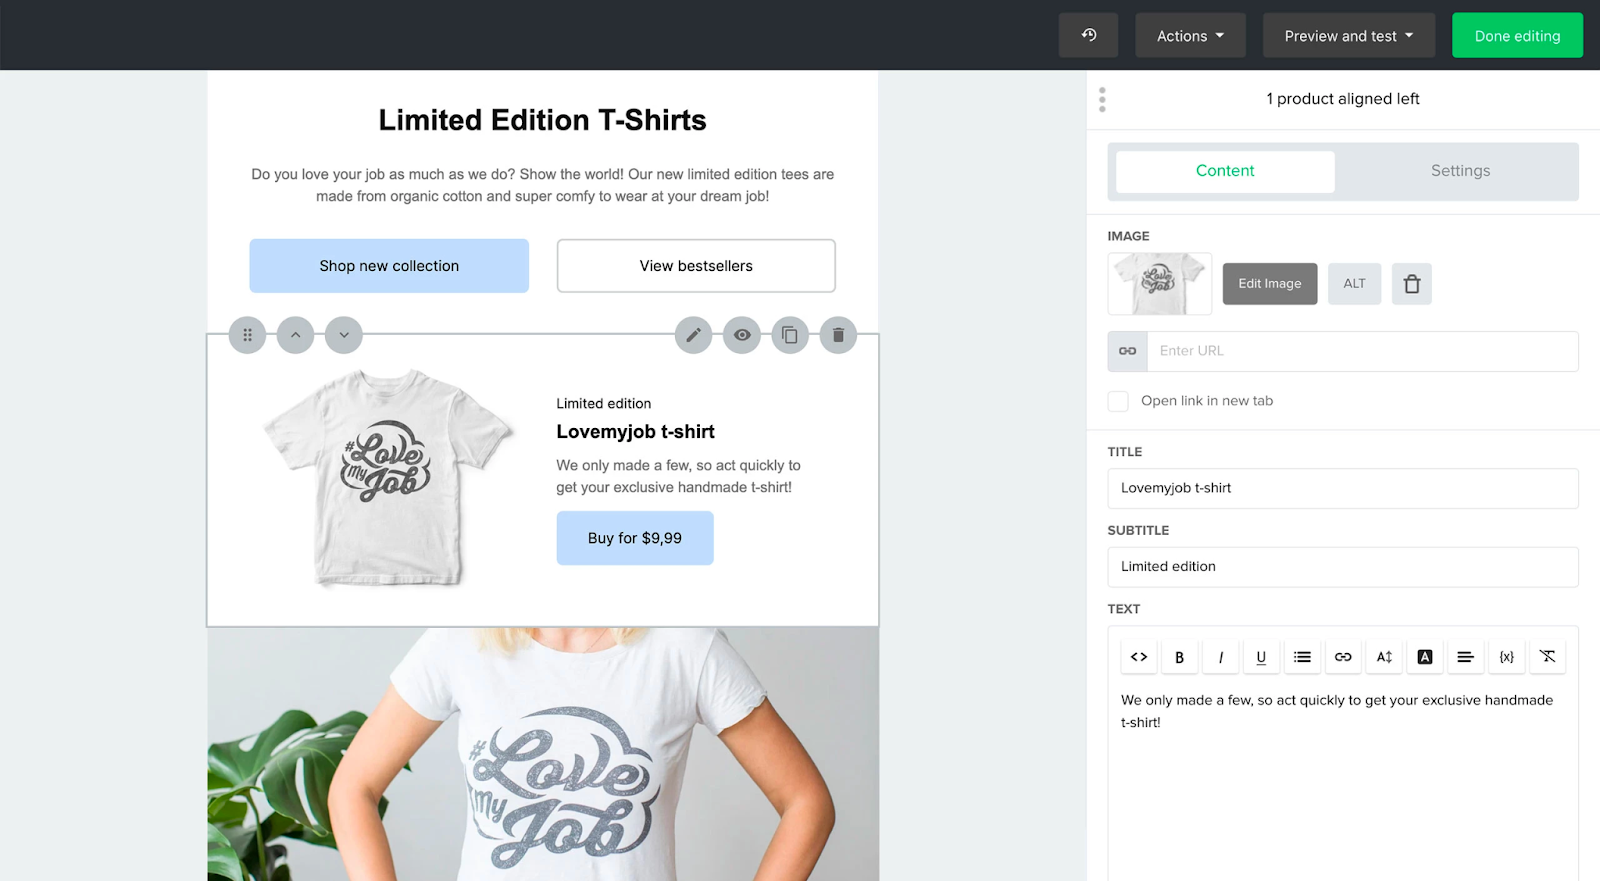 Screenshot of the MailerLite drag and drop editor containing a newsletter with a product block selling T-shirts